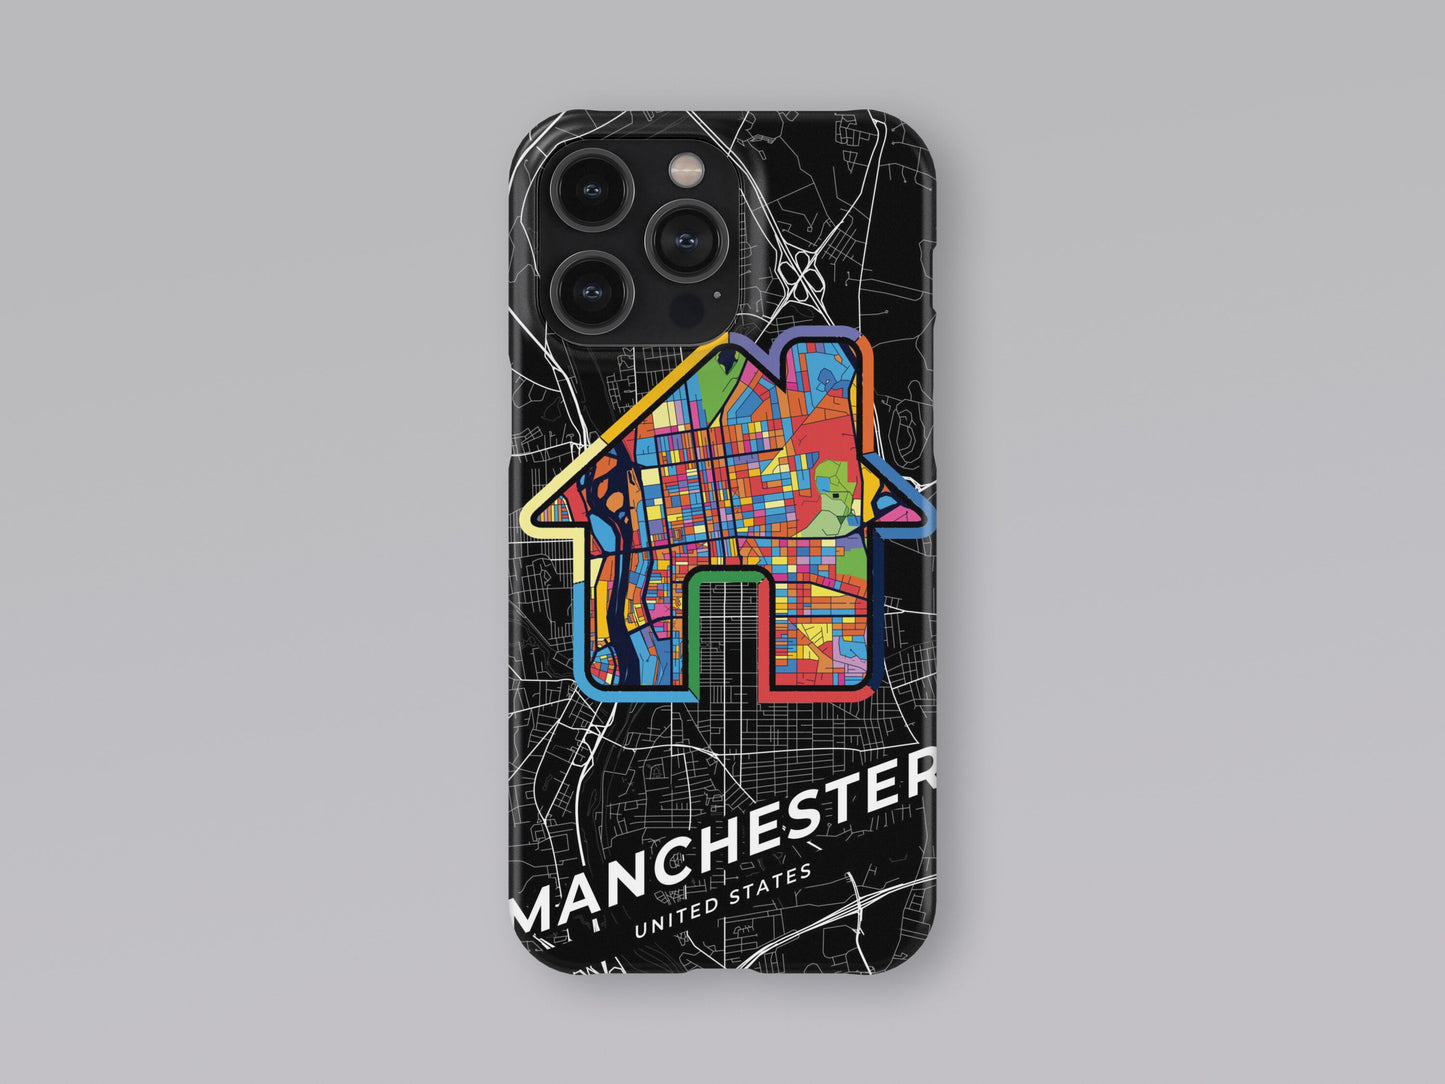 Manchester New Hampshire slim phone case with colorful icon. Birthday, wedding or housewarming gift. Couple match cases. 3